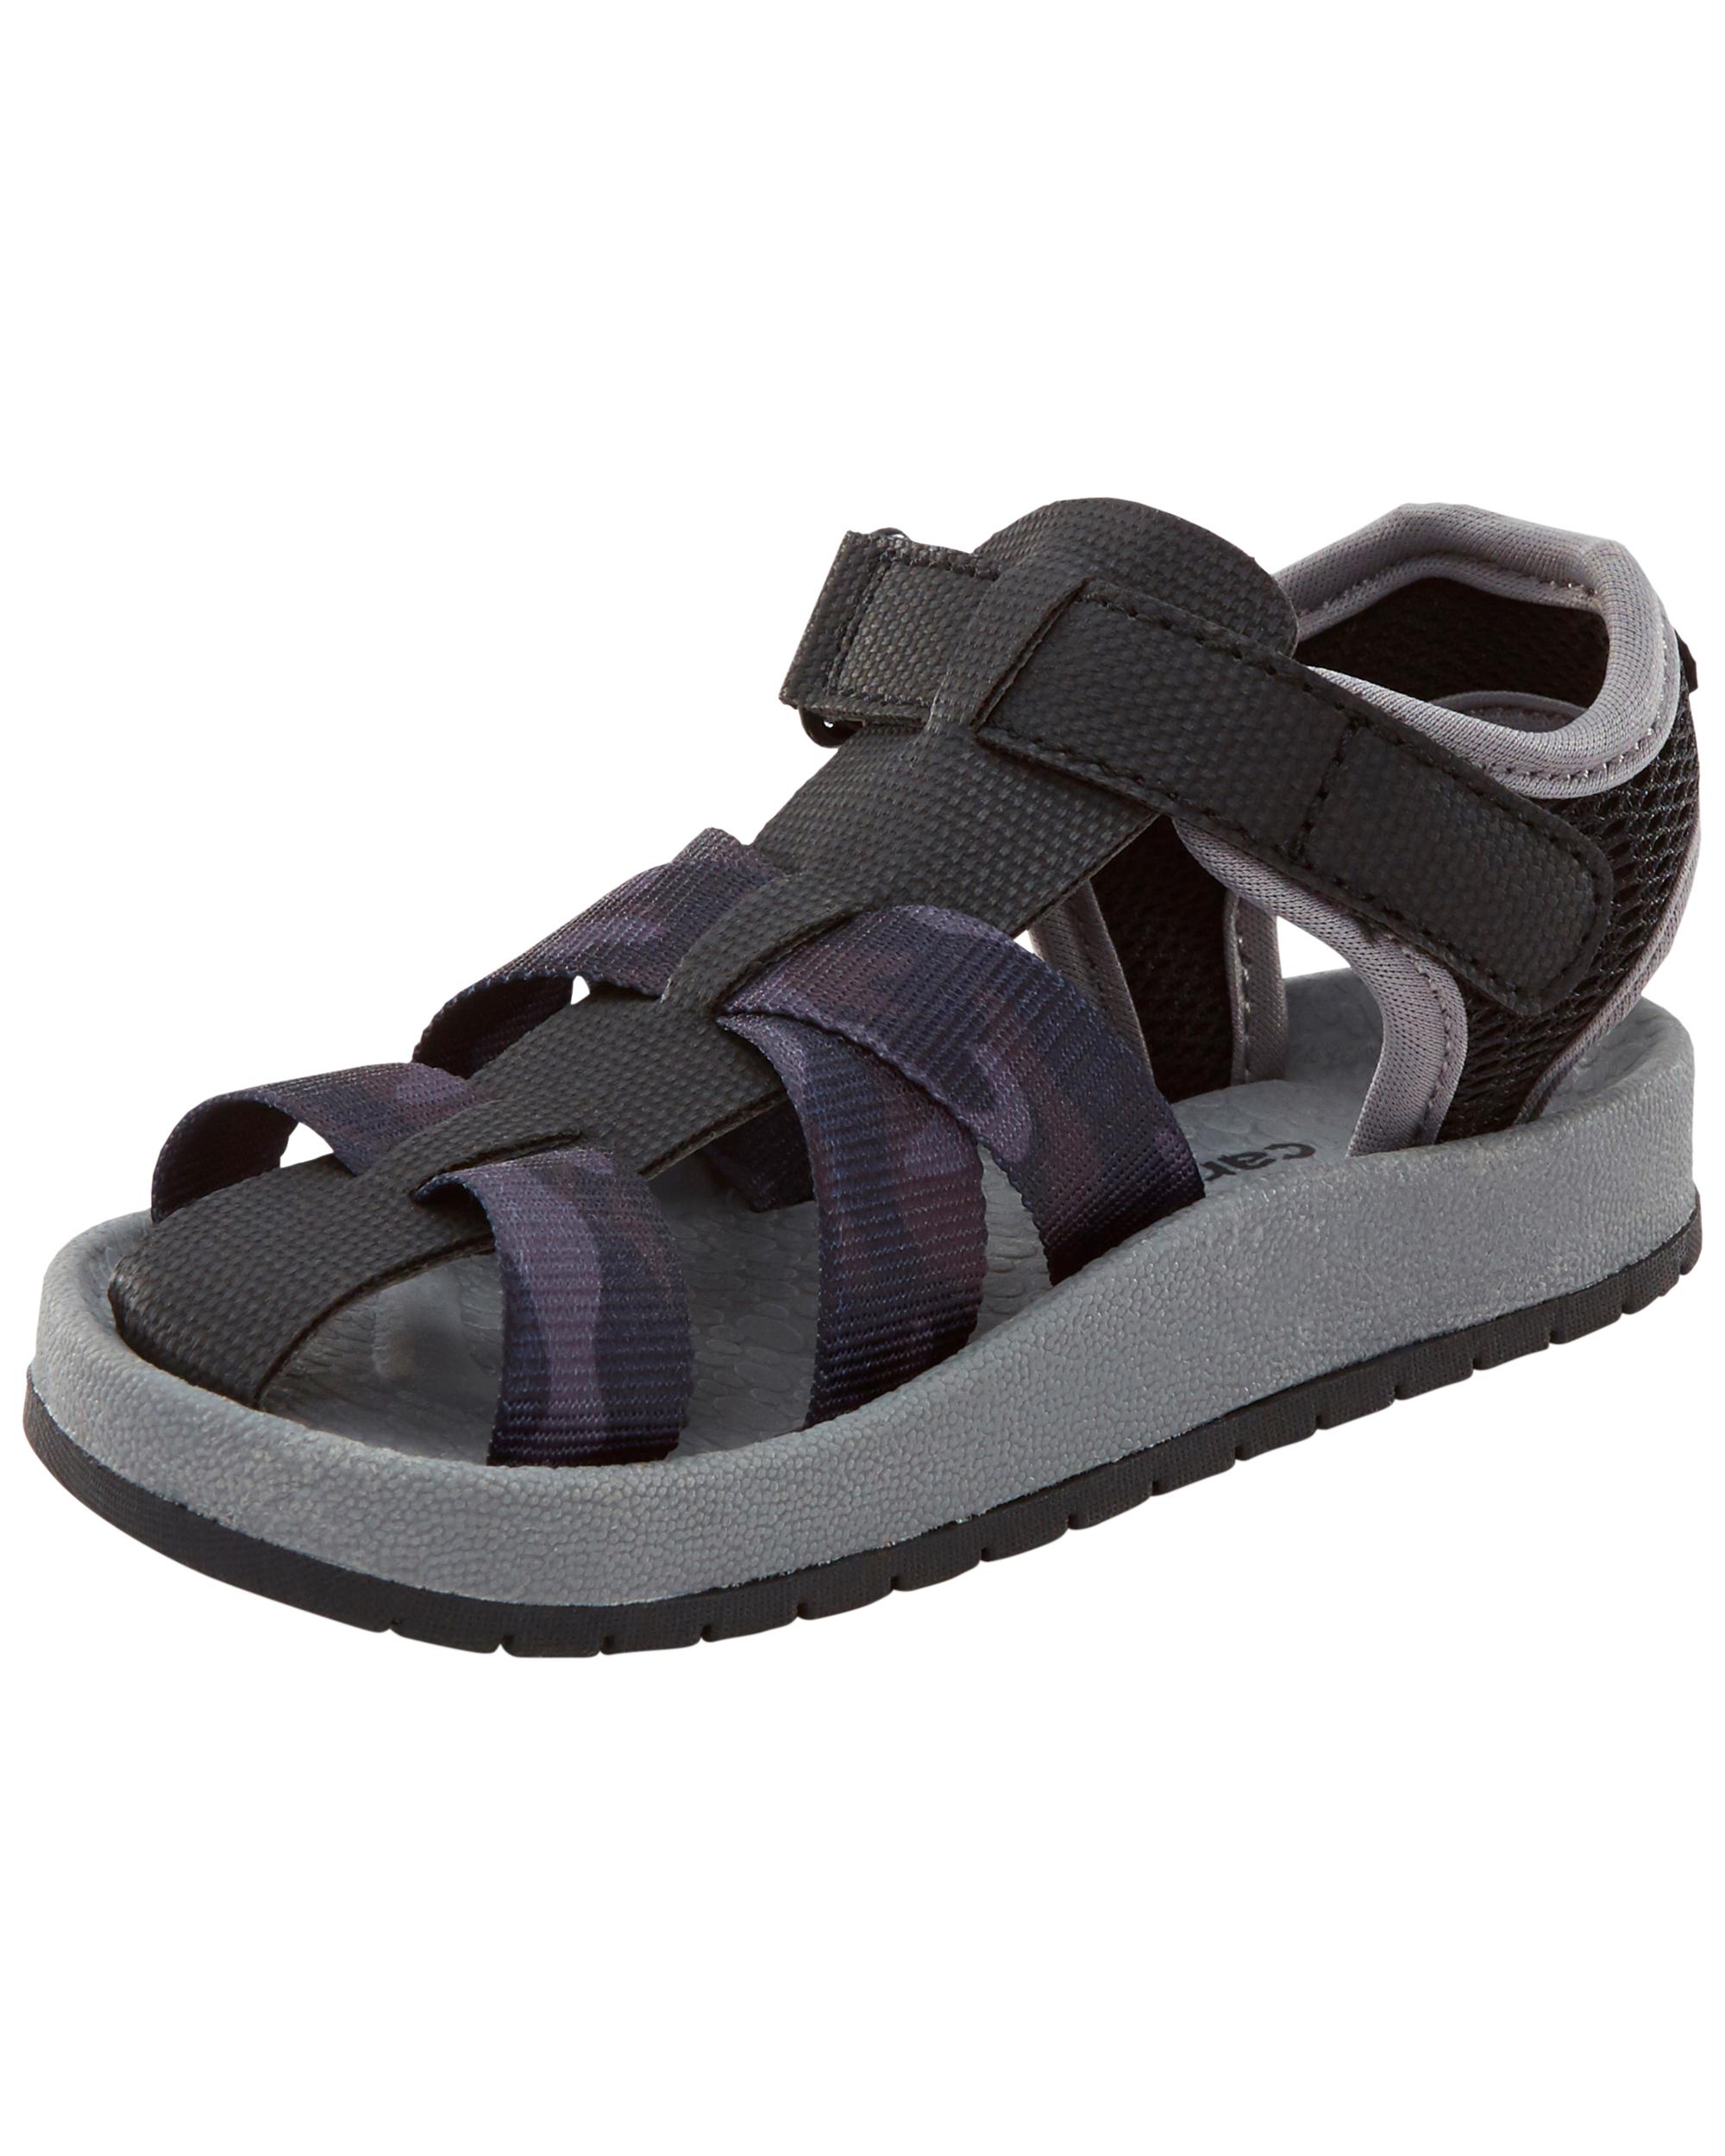 Fisherman Recycled Sandals